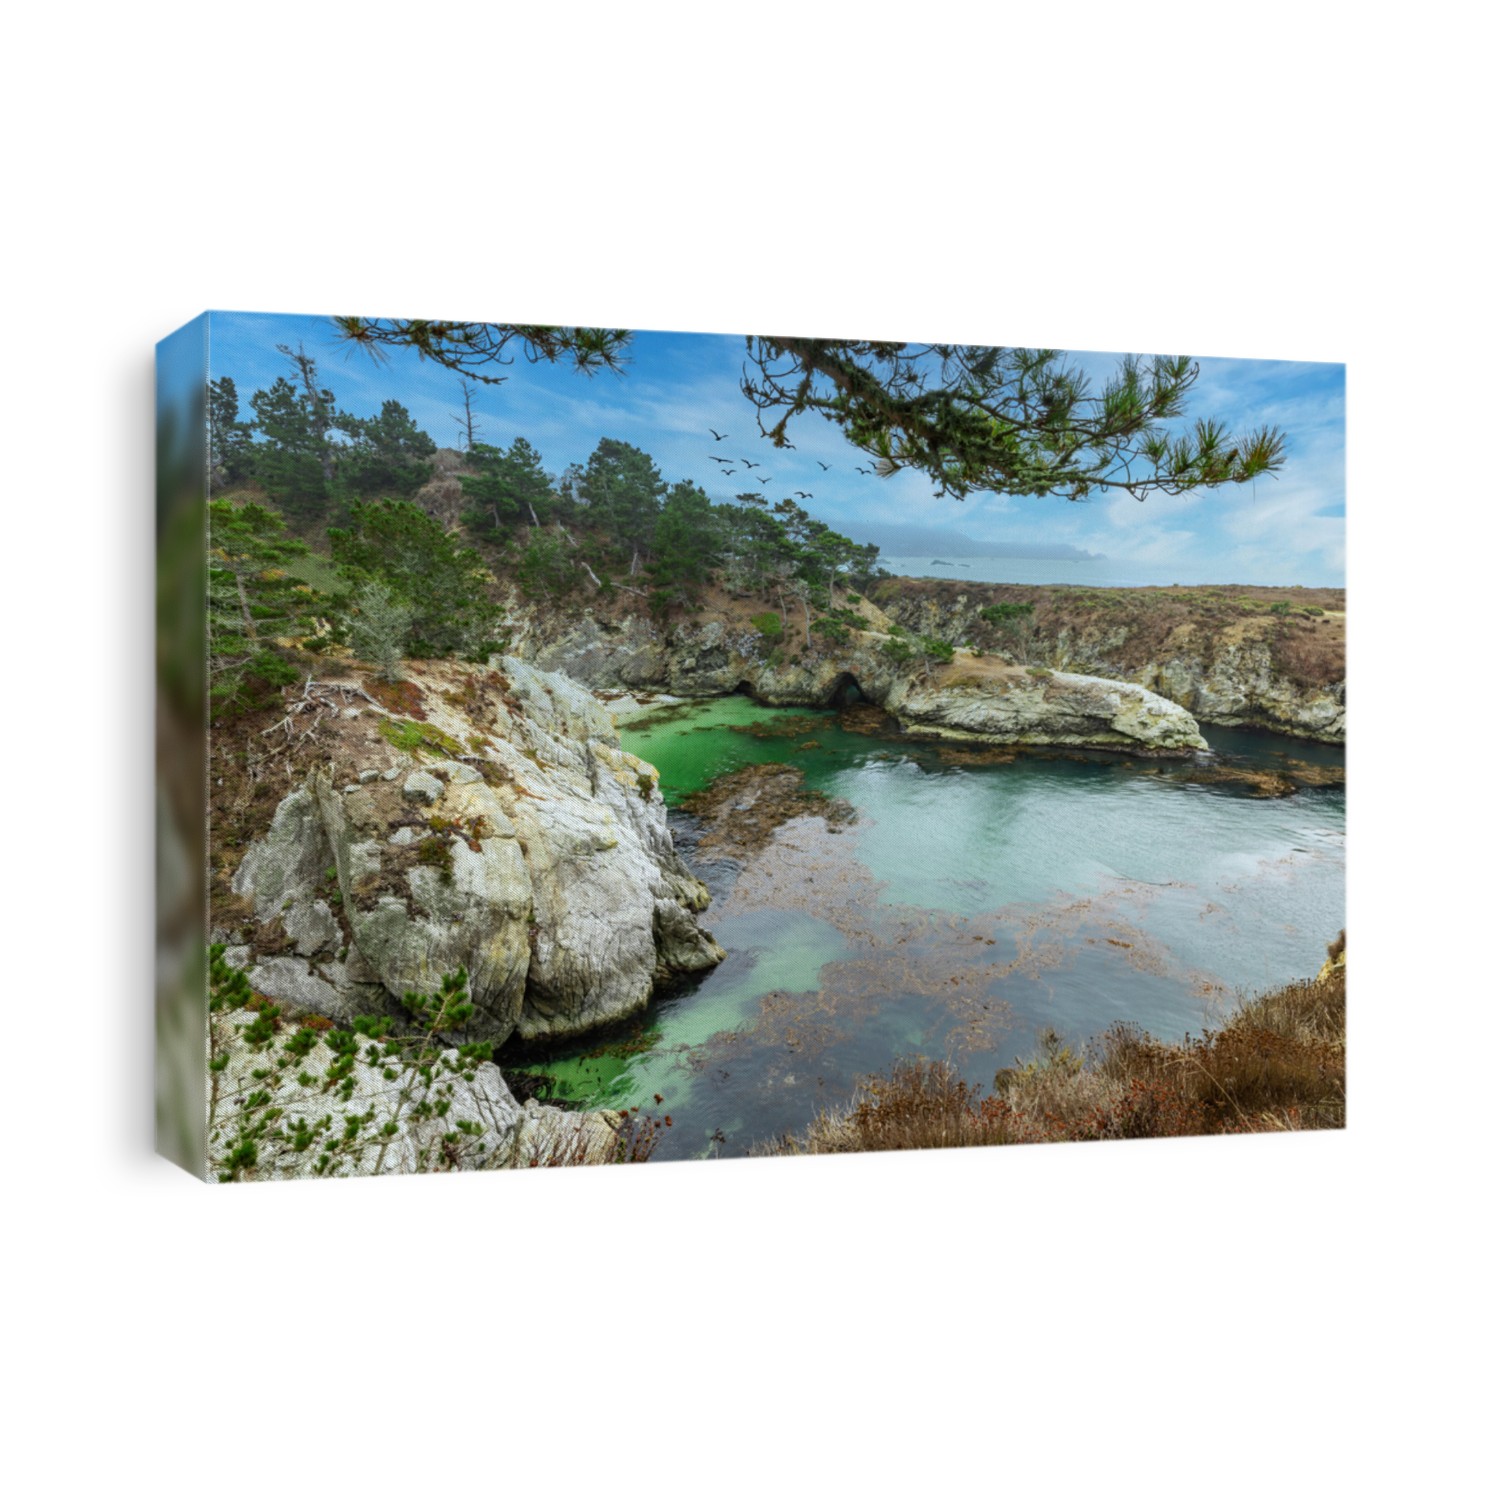 China Cove, Beach in Point Lobos State Natural Reserve, with rock and geological formations along the rugged Big Sur coastline, near Carmel and Monterey, CA. on the California Central Coast.